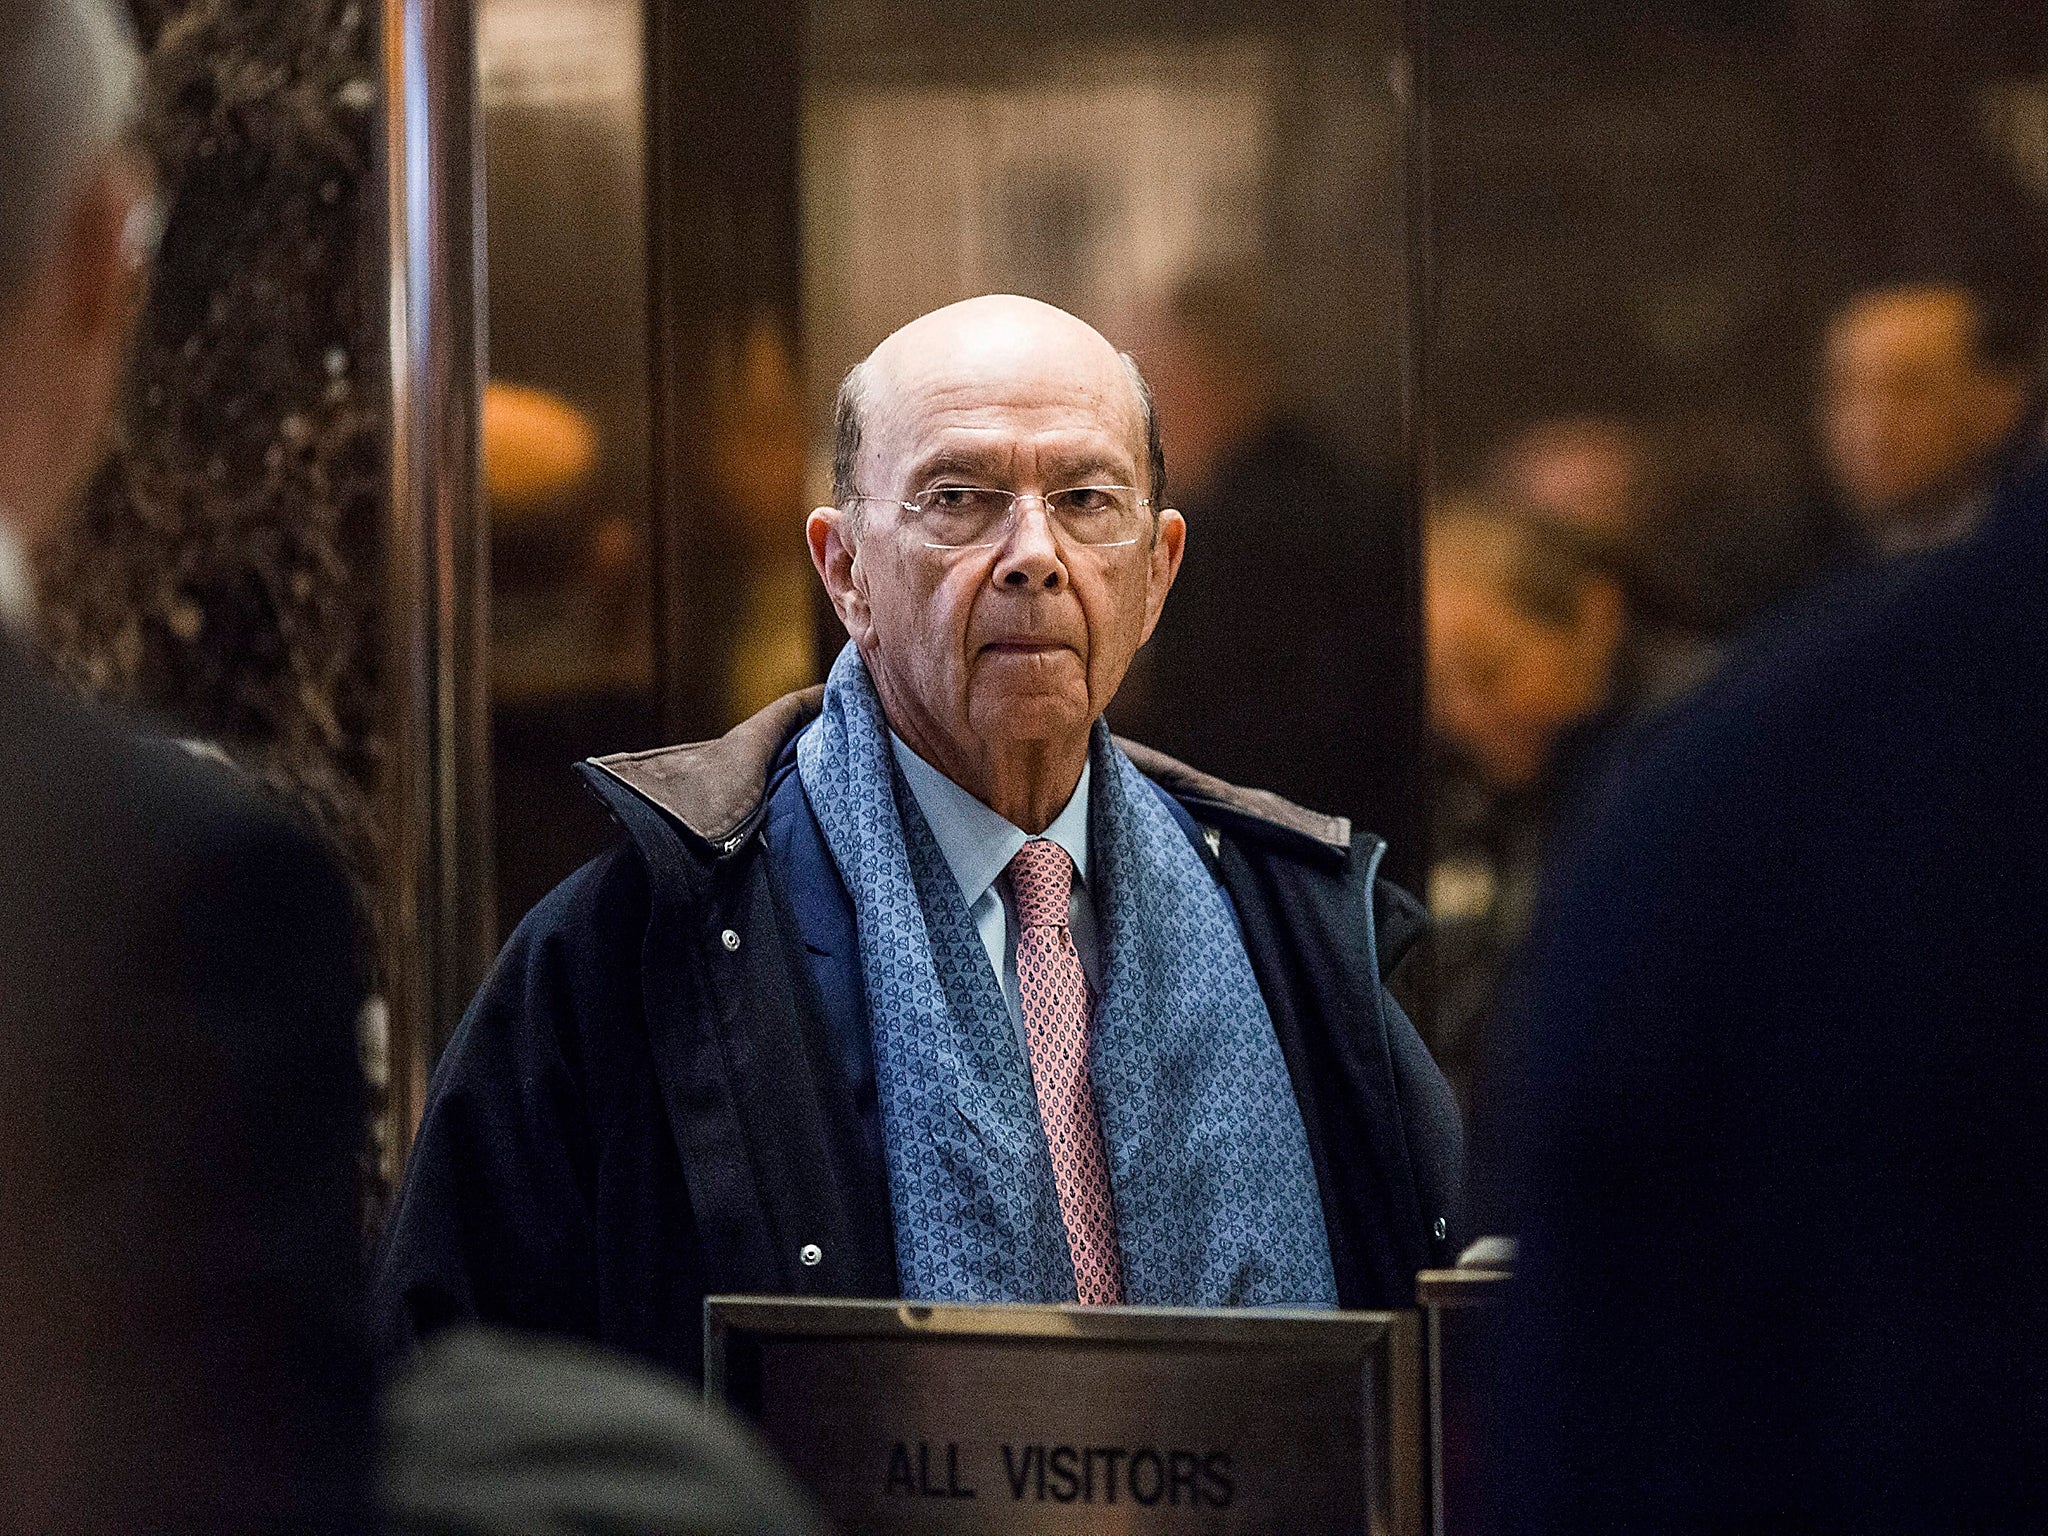 Billionaire investor Wilbur Ross arrives in the lobby of Trump Tower in Manhattan, New York. The US President-elect Donald Trump is holding meetings at Trump Tower as he continues to fill in key positions in his new administration